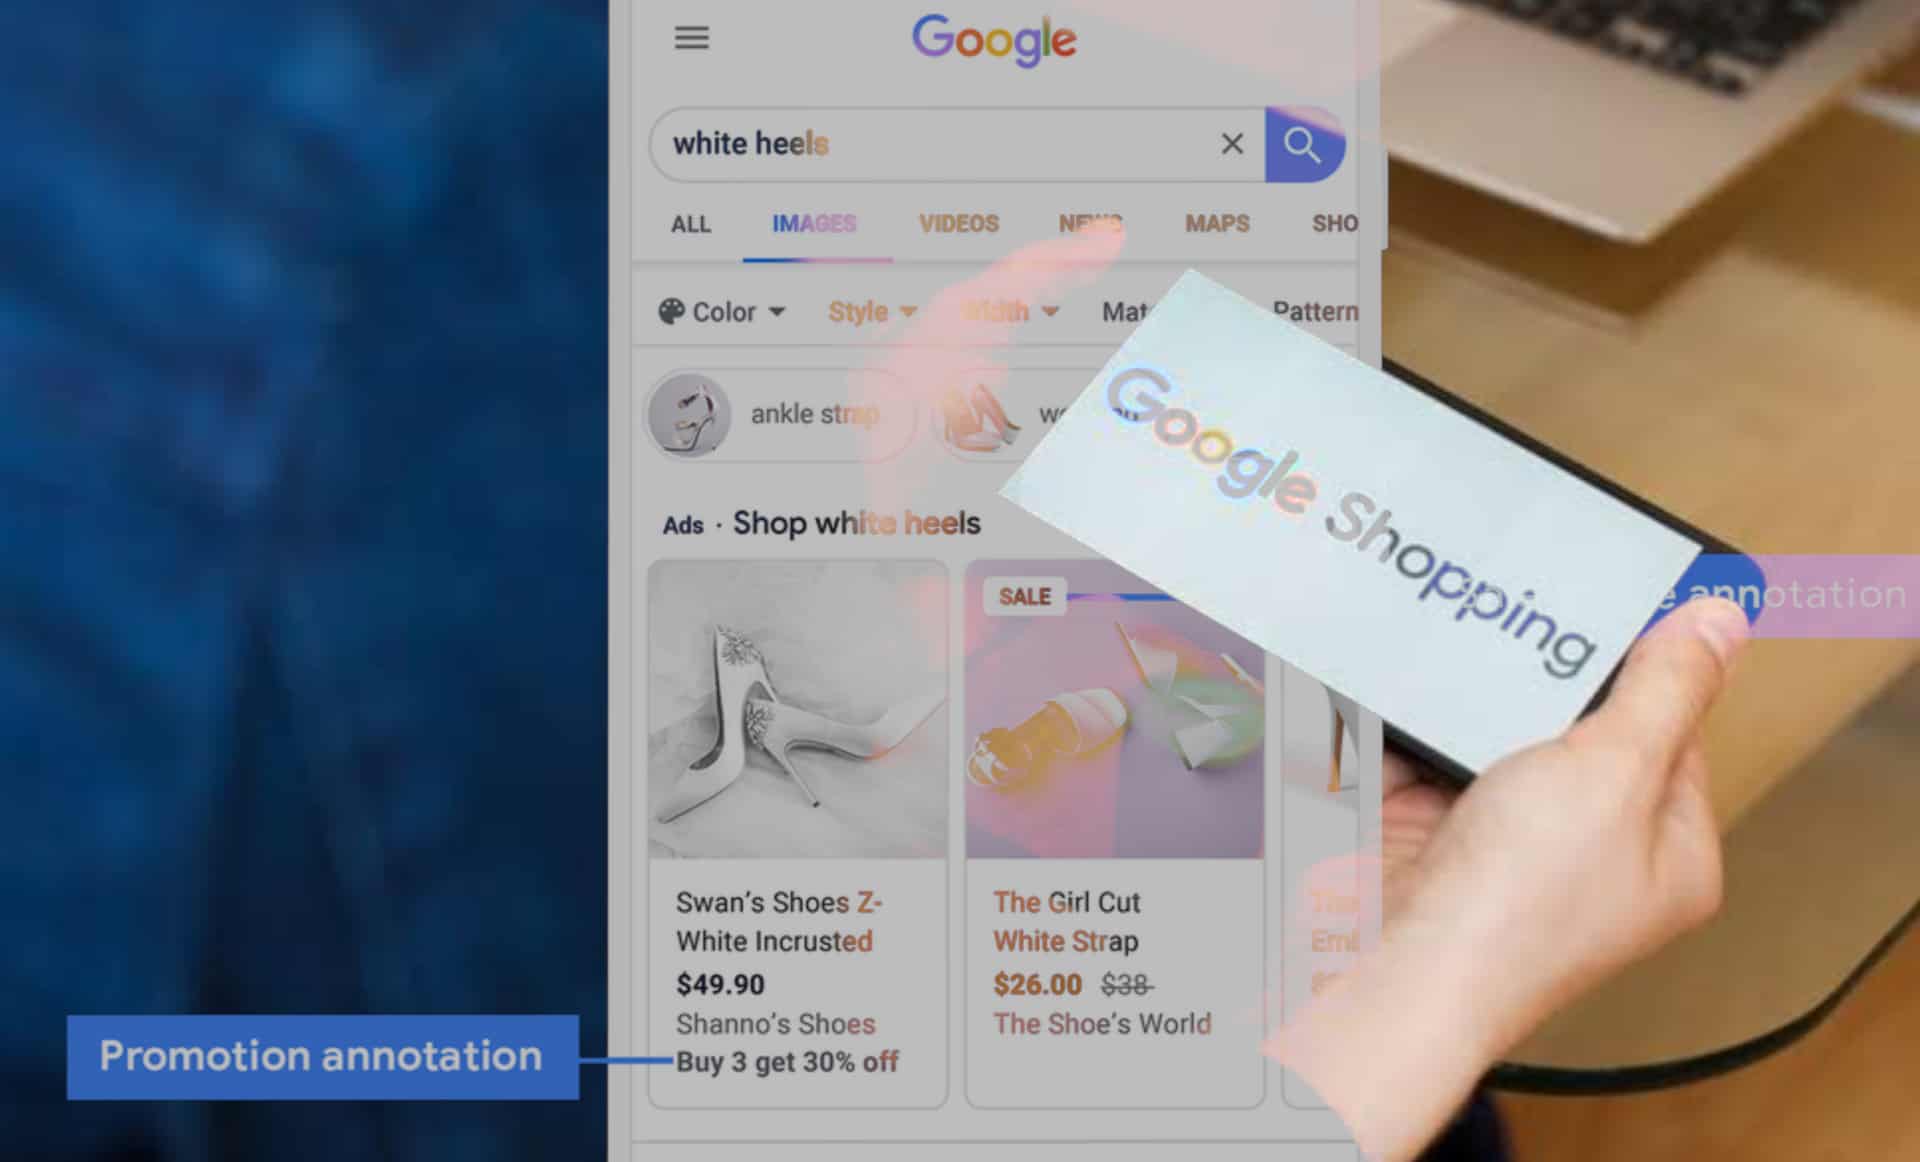 Google Now Makes it Easier for Shoppers and Retailers to Make Best Out of This Holiday Season